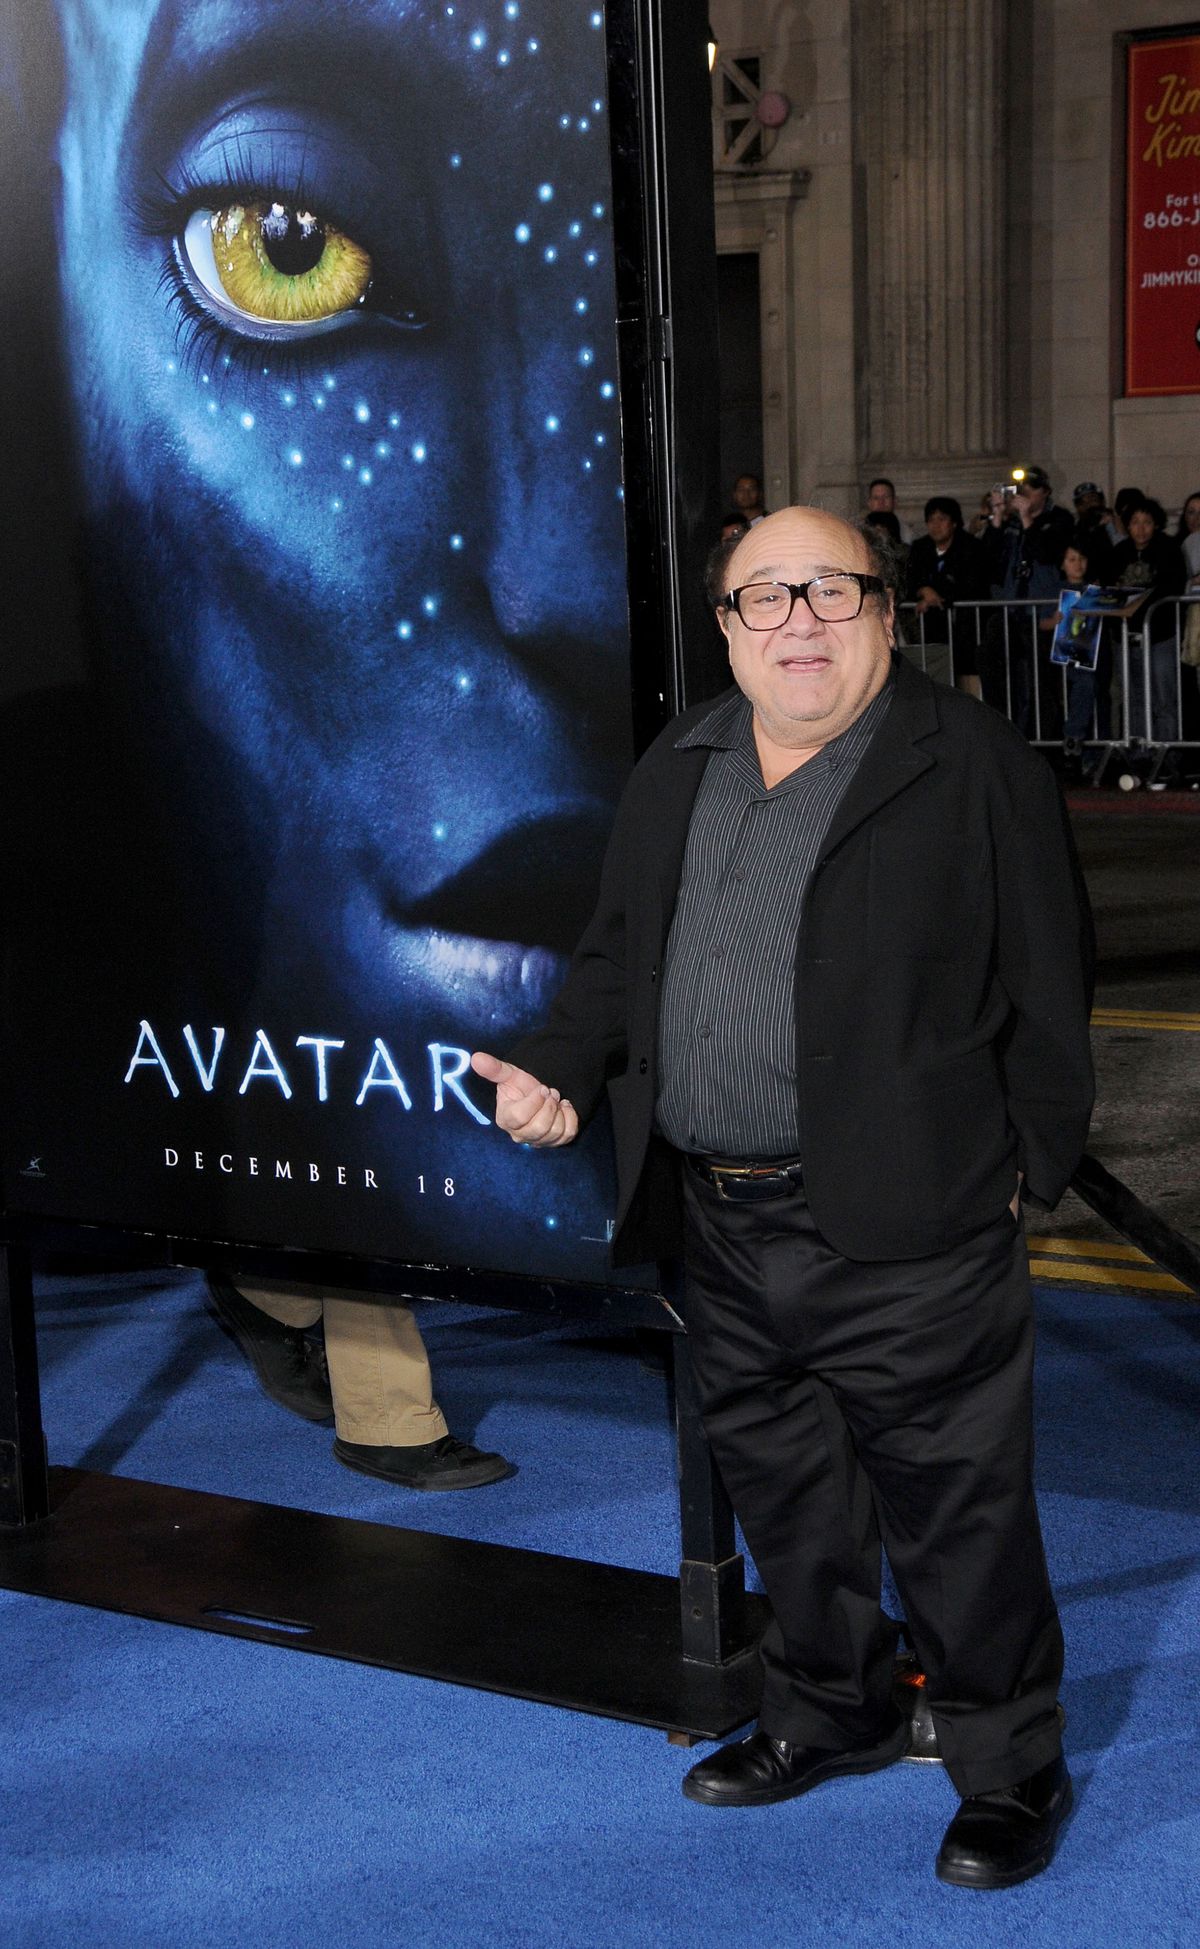 Danny DeVito once again standing next to an Avatar poster possibly saying “Hey, this guy.”